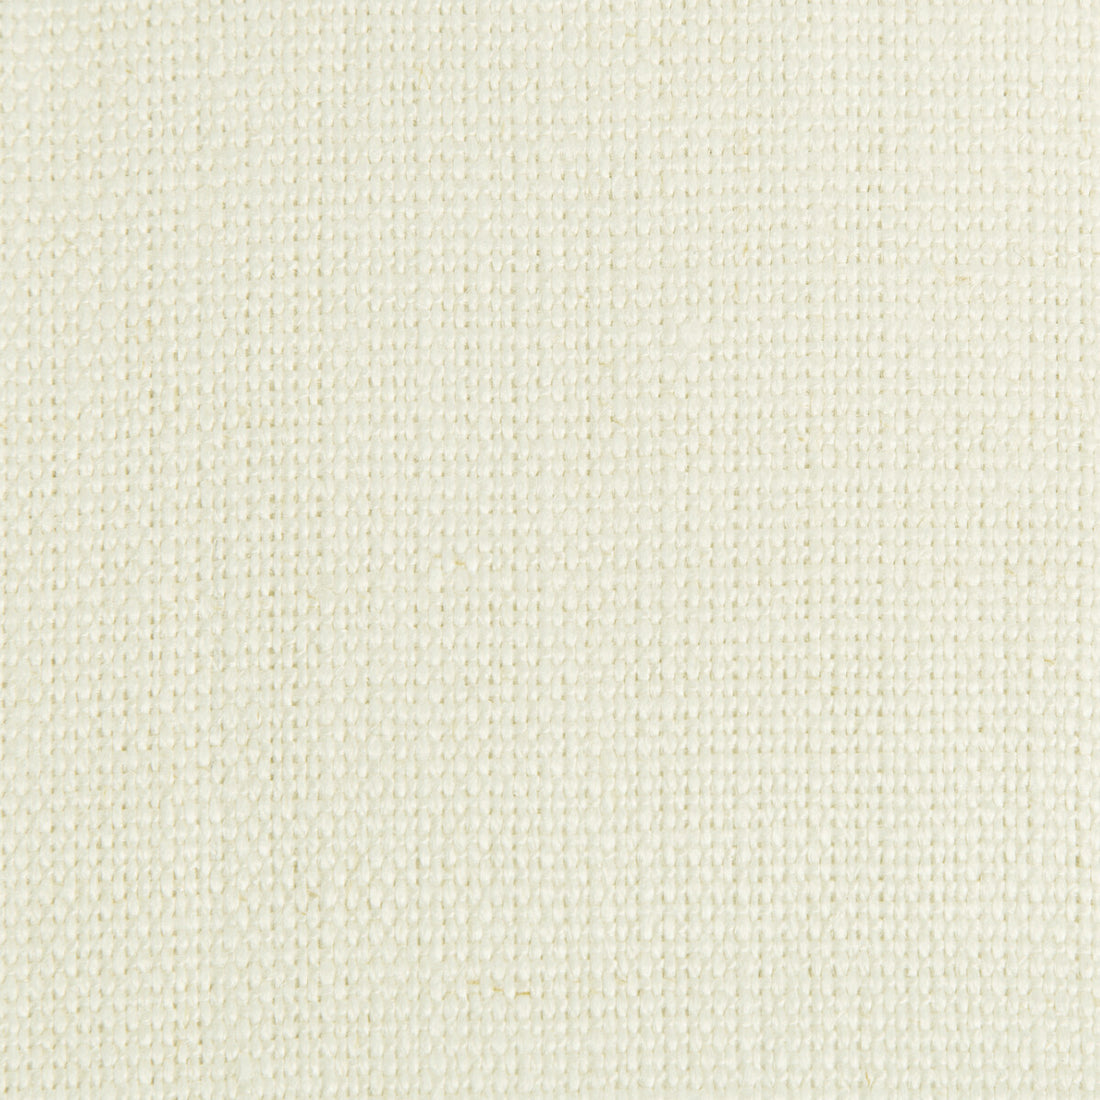 Hampton Linen fabric in snow color - pattern 2012171.111.0 - by Lee Jofa in the Colour Complements II collection